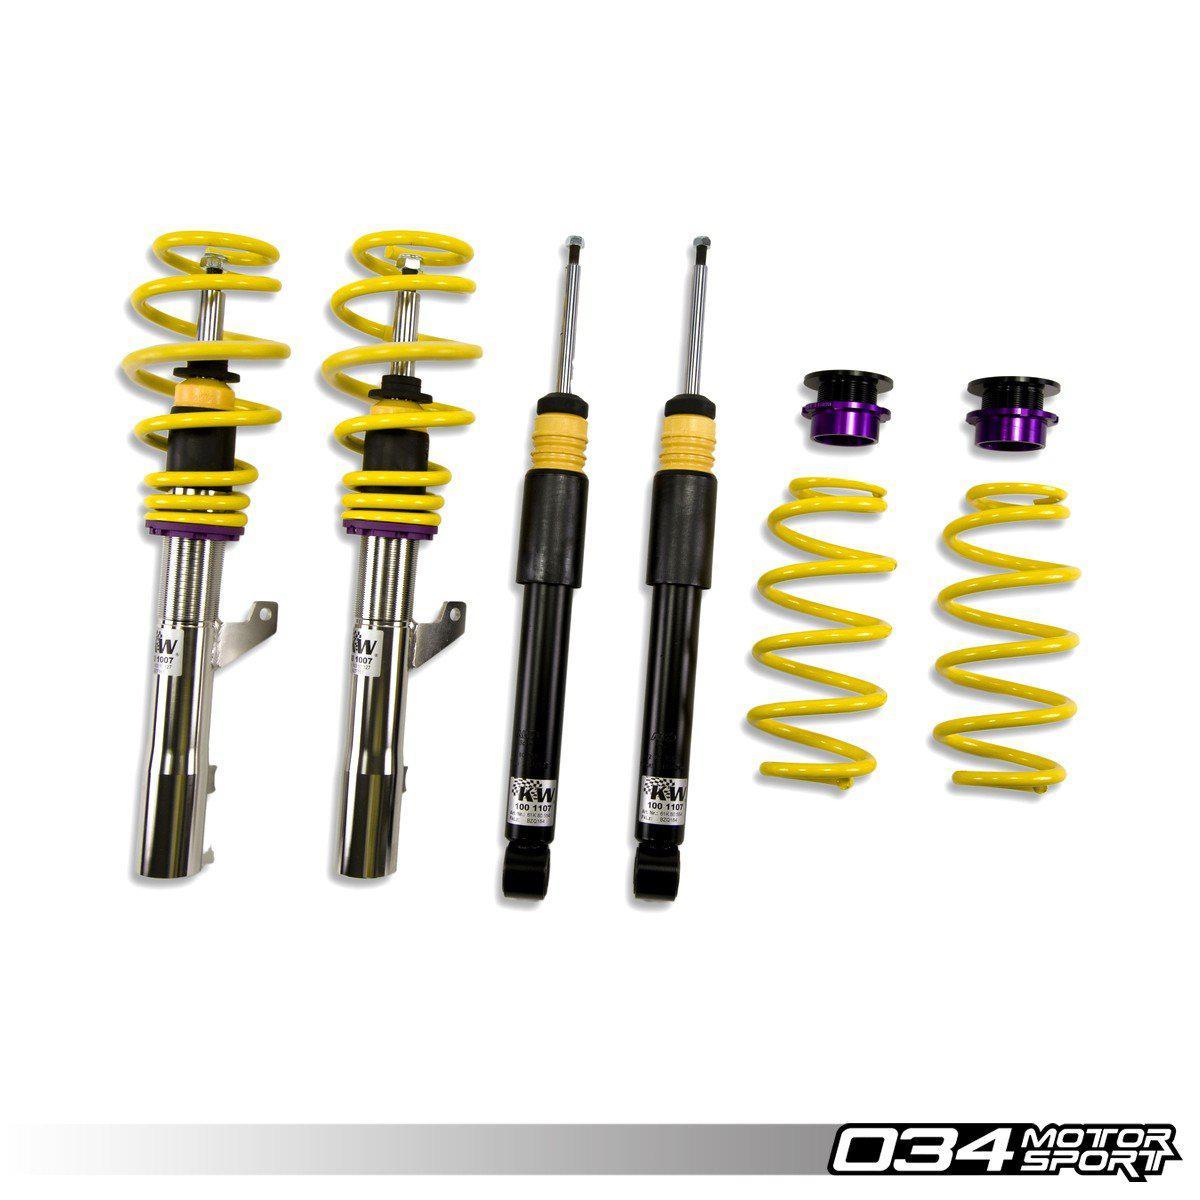 KW Variant 2 Coilover Suspension, C7/C7.5 Audi A6, FWD &amp; Quattro-A Little Tuning Co